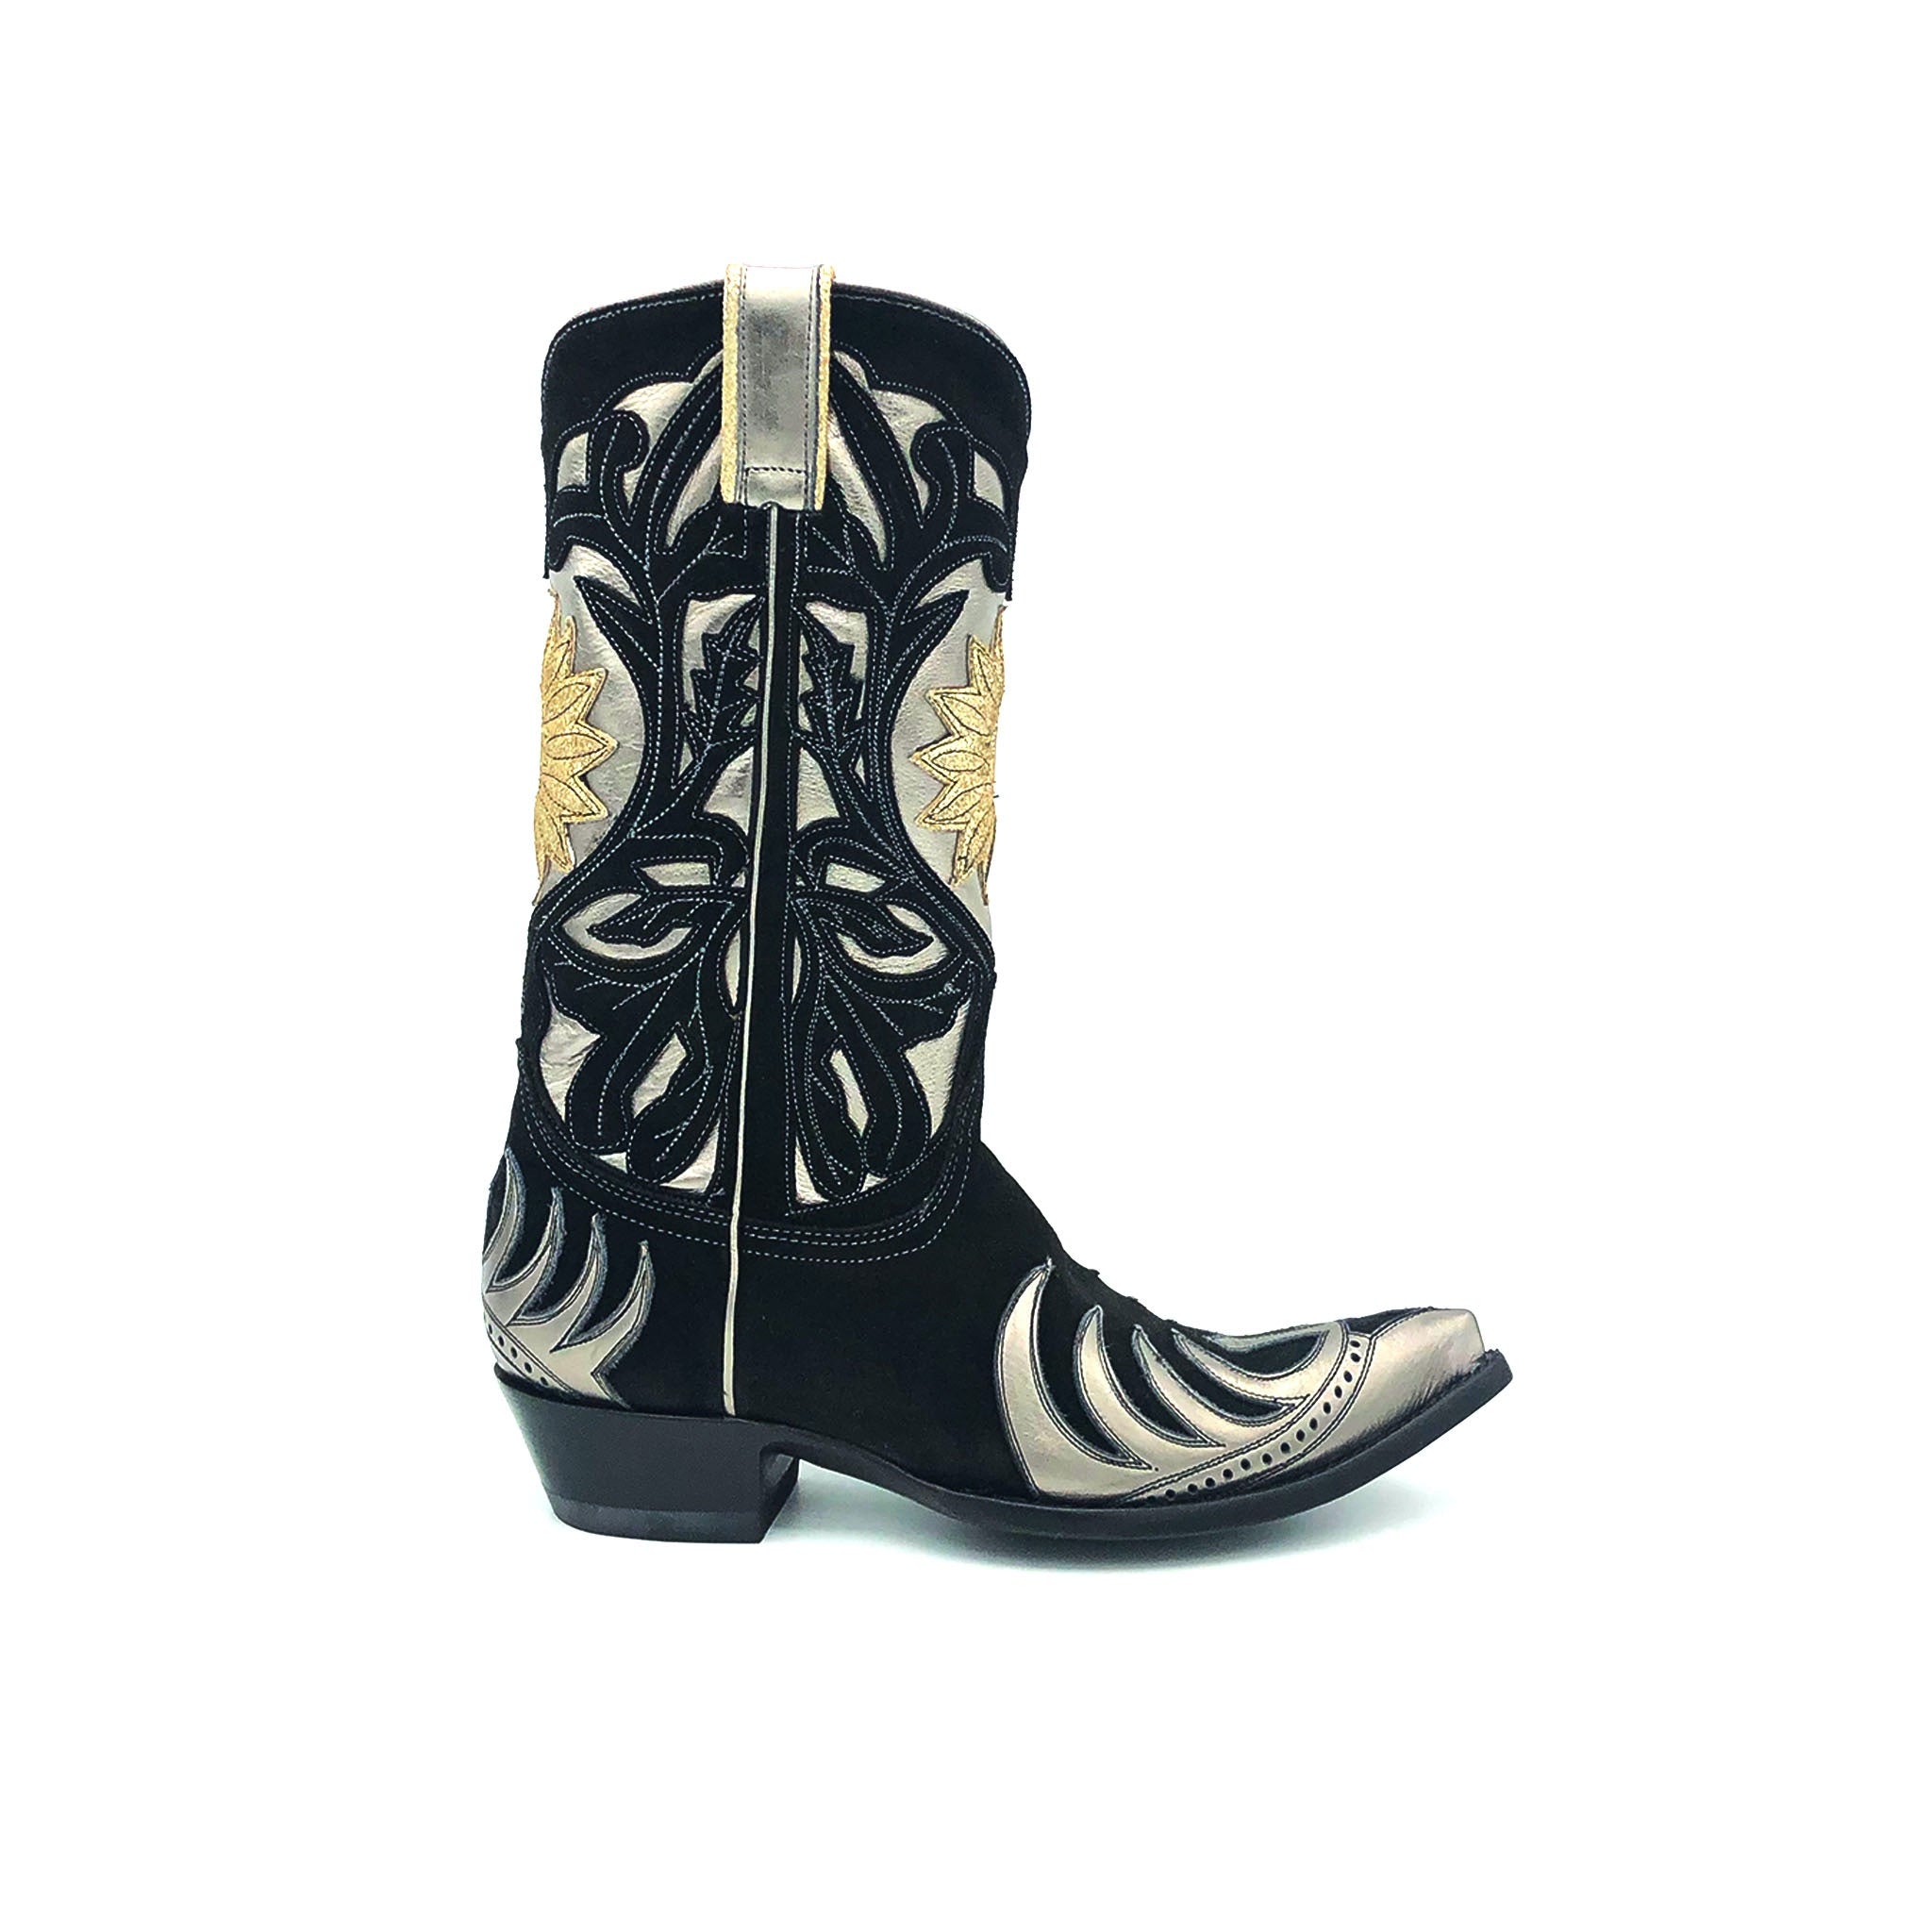 black and silver cowboy boots